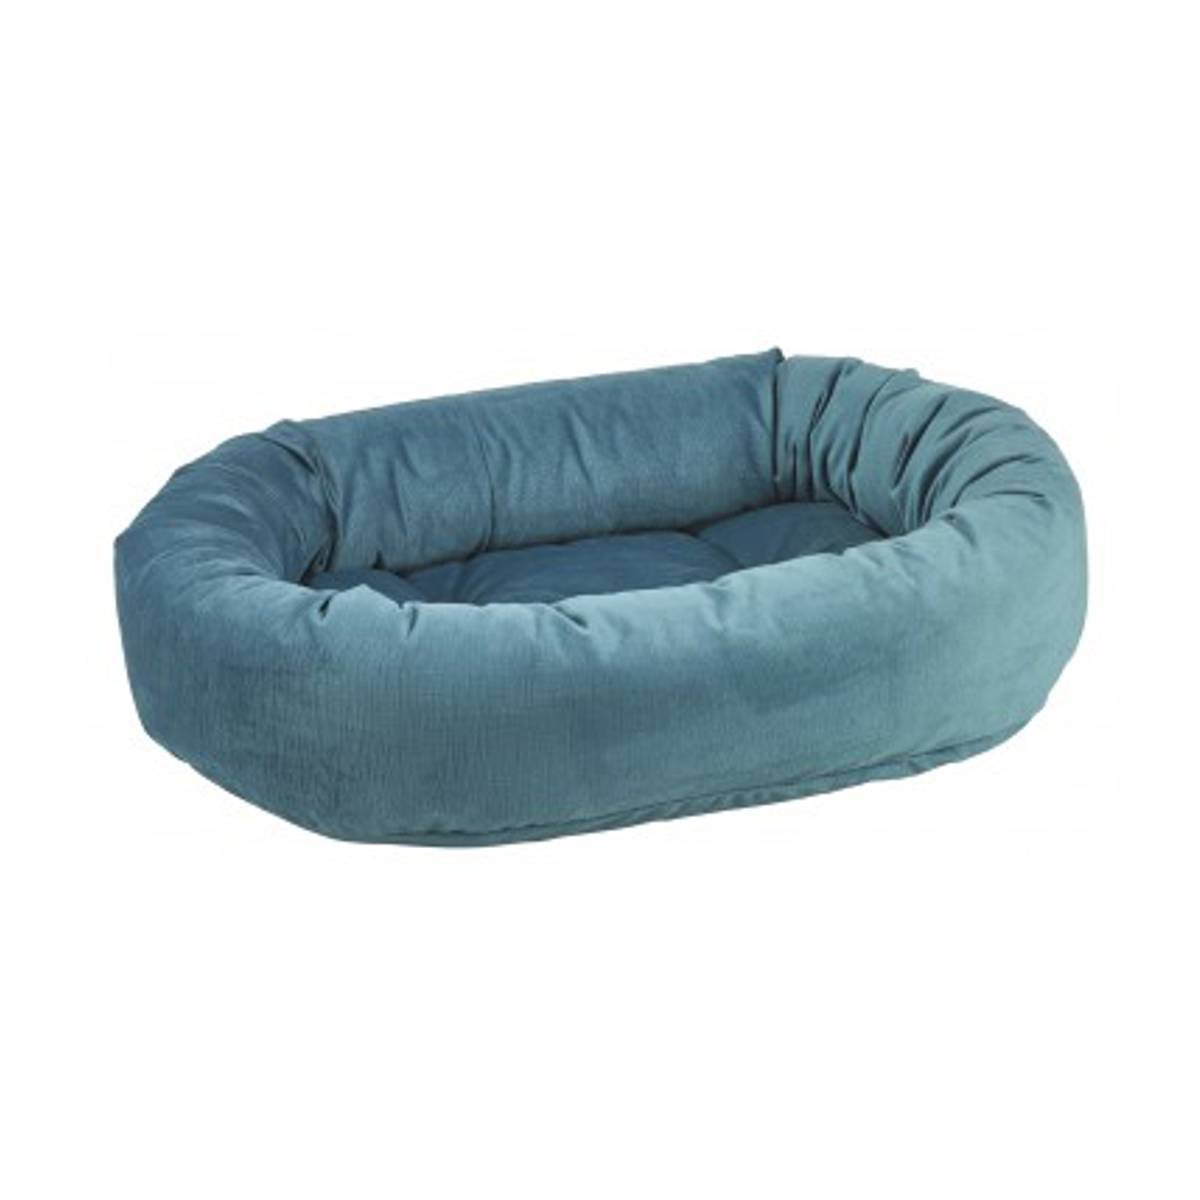 Donut Dog Pet Bed in Teal | Pawlicious & Company